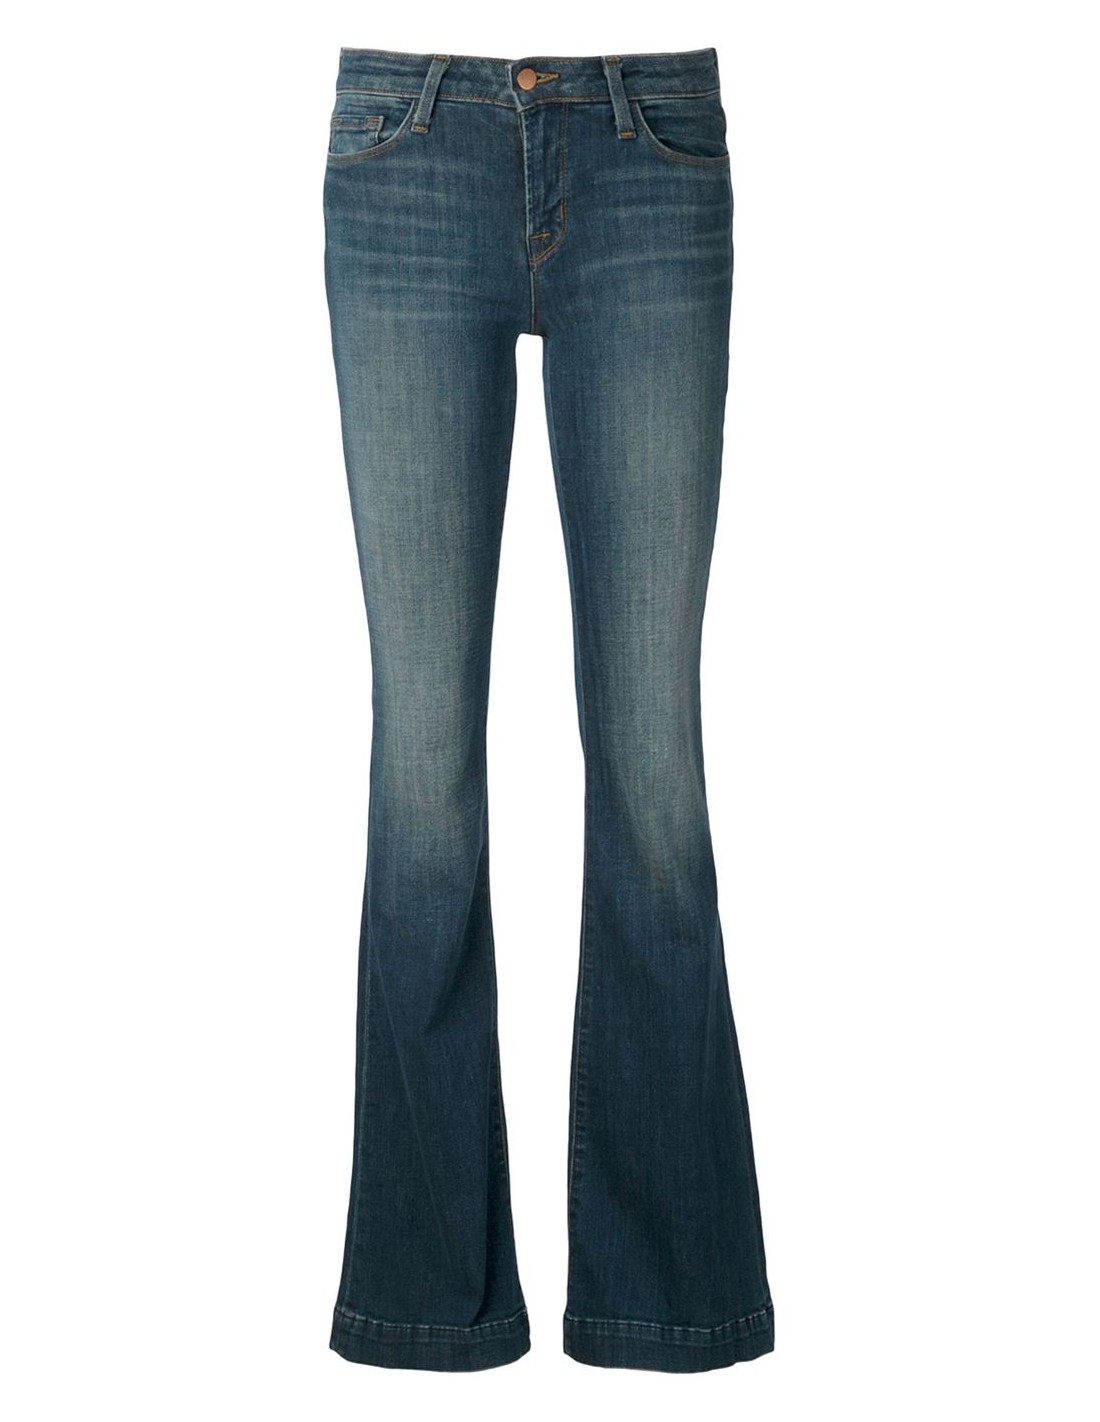 Jbrand - Love Story Jeans J Brand for Woman - serie ||| NOIRE